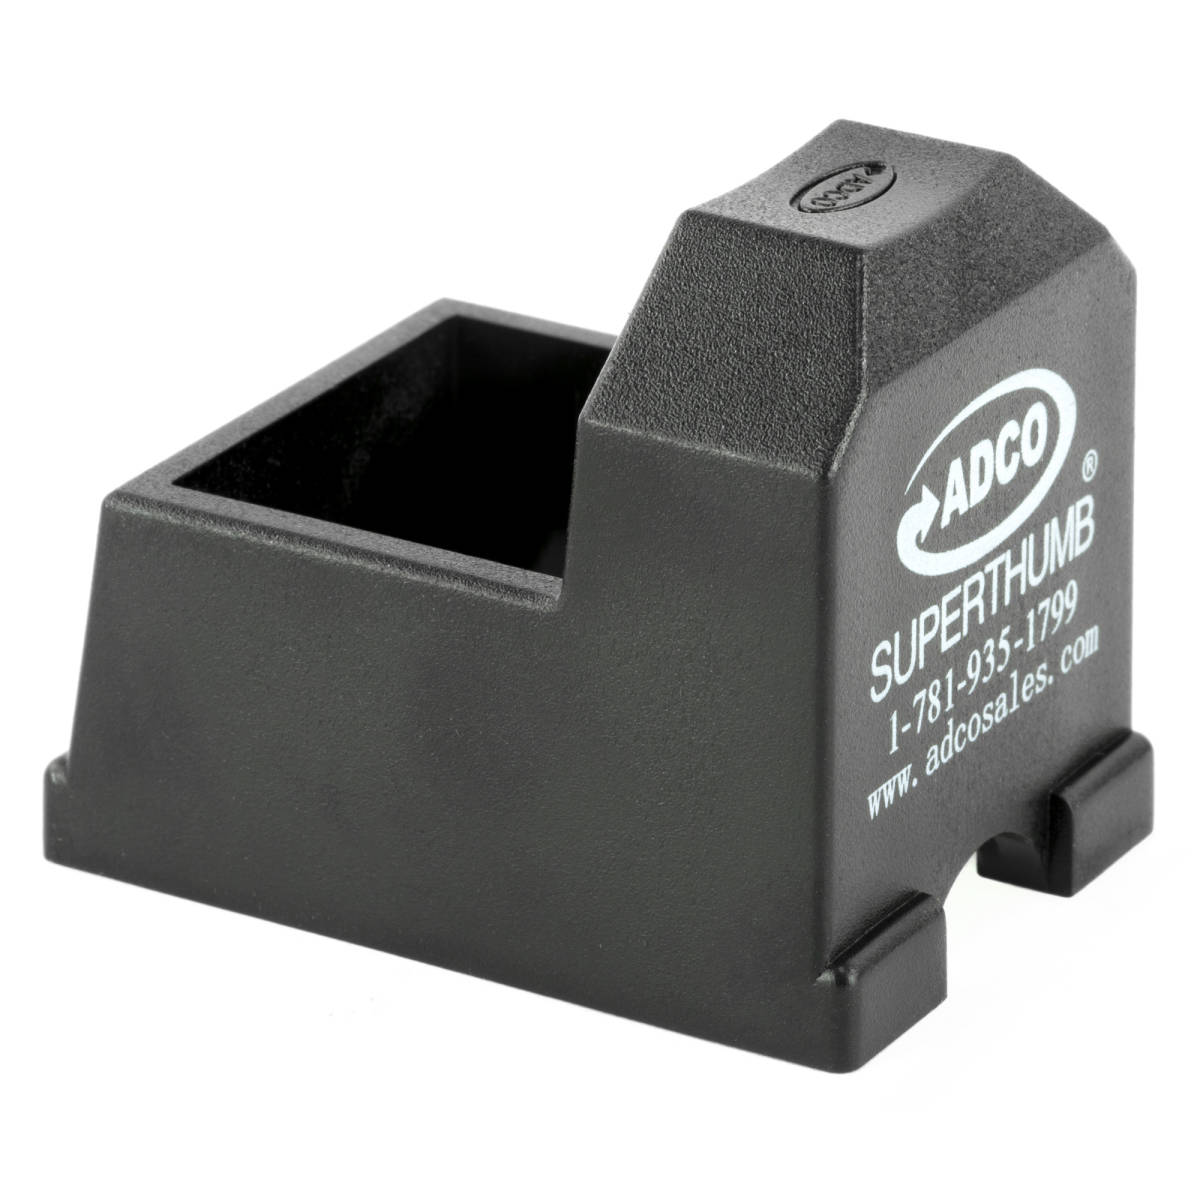 ADCO ST4 Super Thumb Mag Loader Extended Capacity Ruger 10/22, Black...-img-1